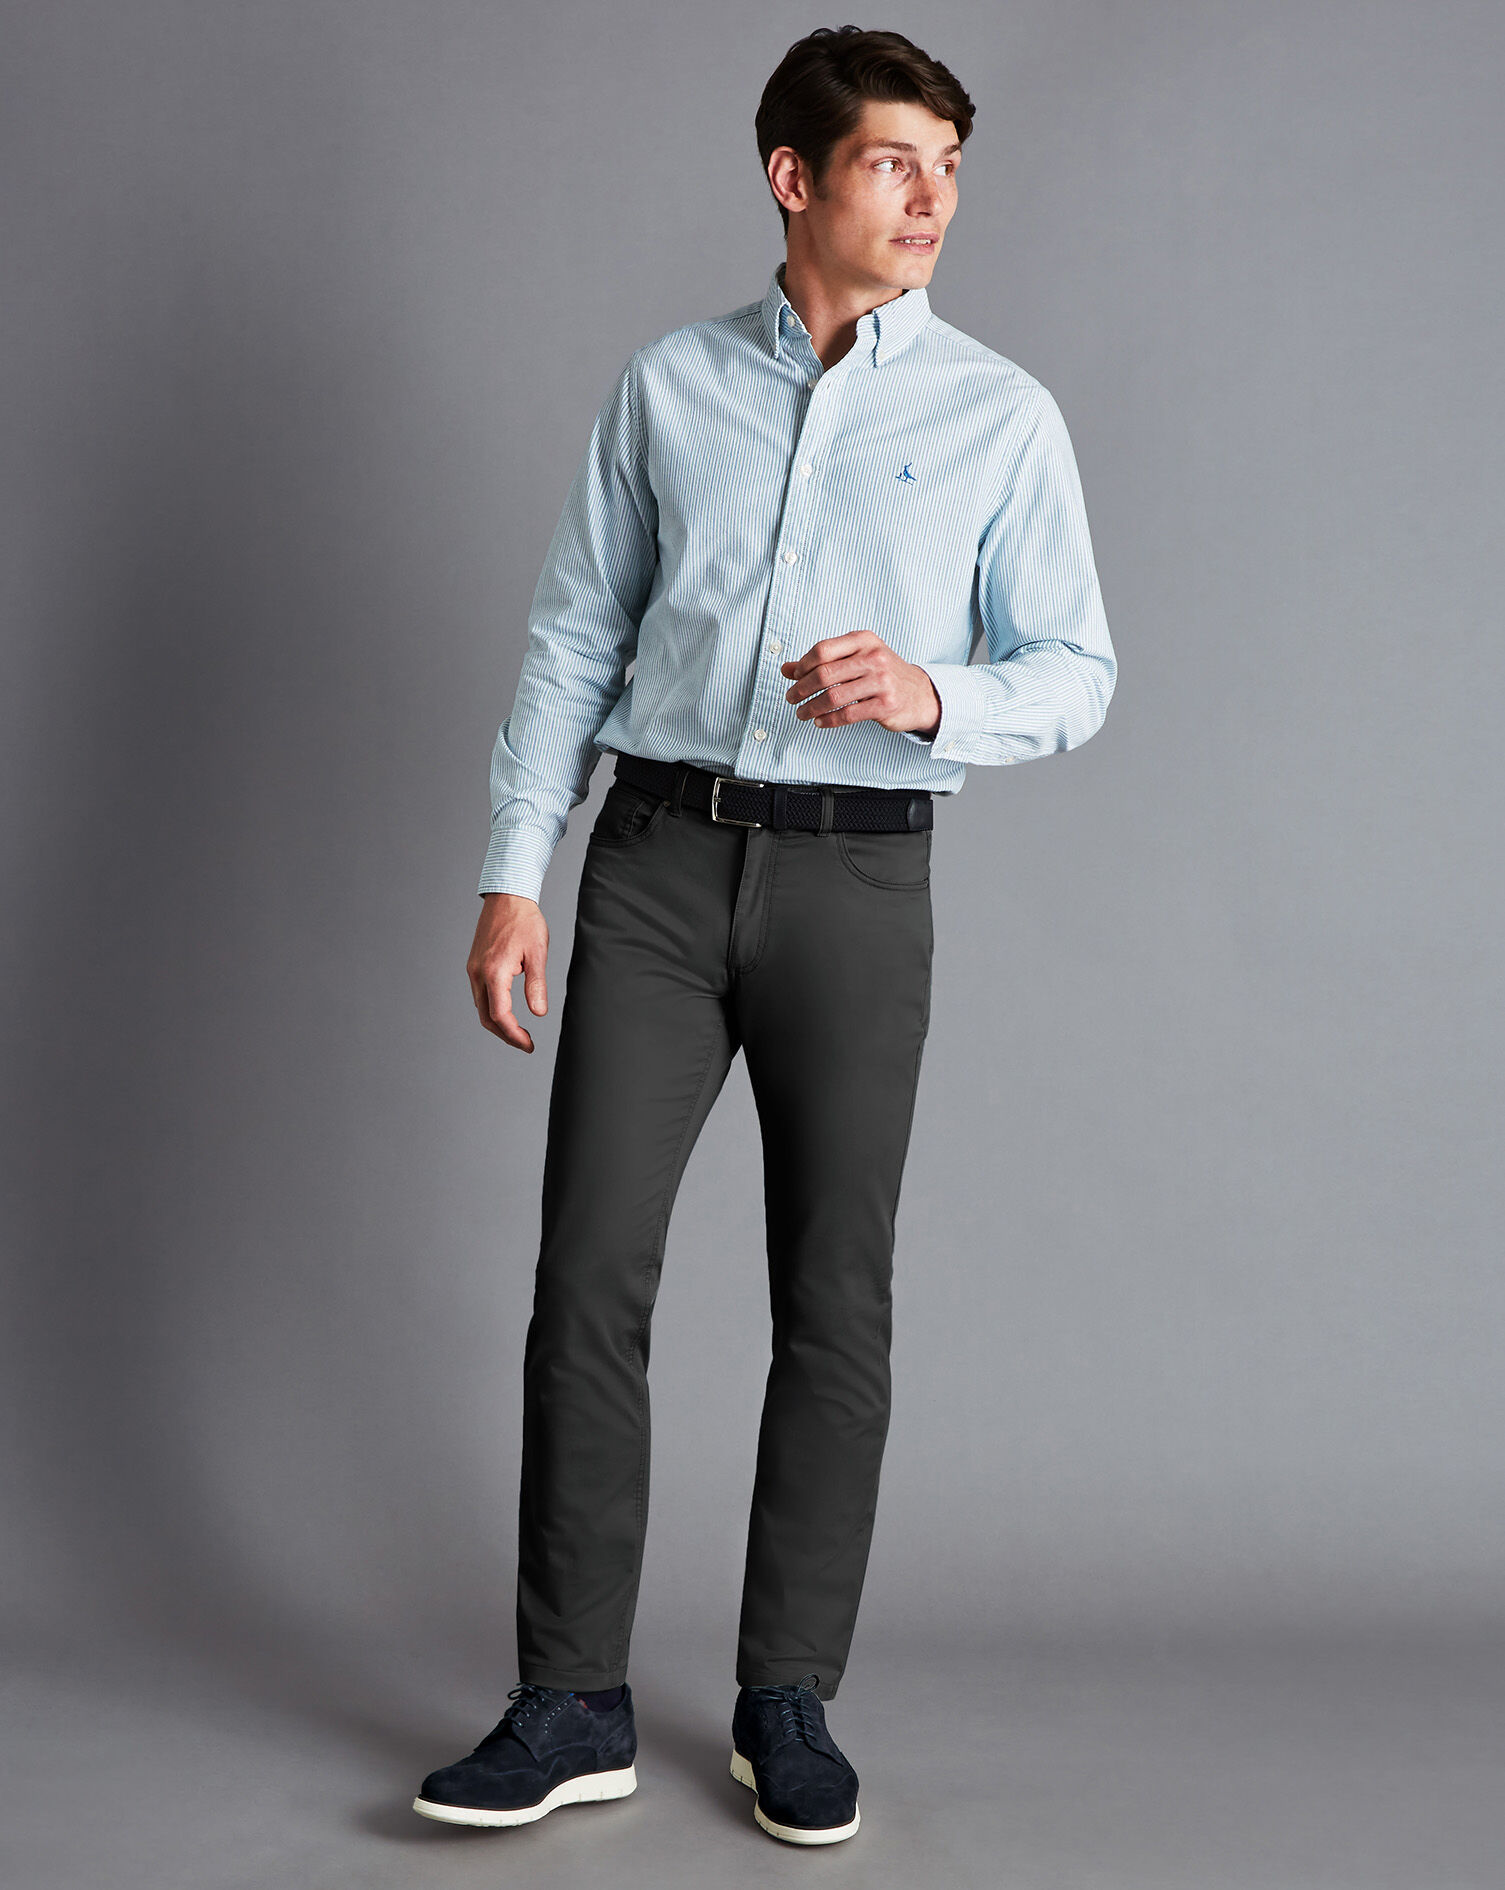 5500 Blue Shirt Grey Pants Stock Photos Pictures  RoyaltyFree Images   iStock